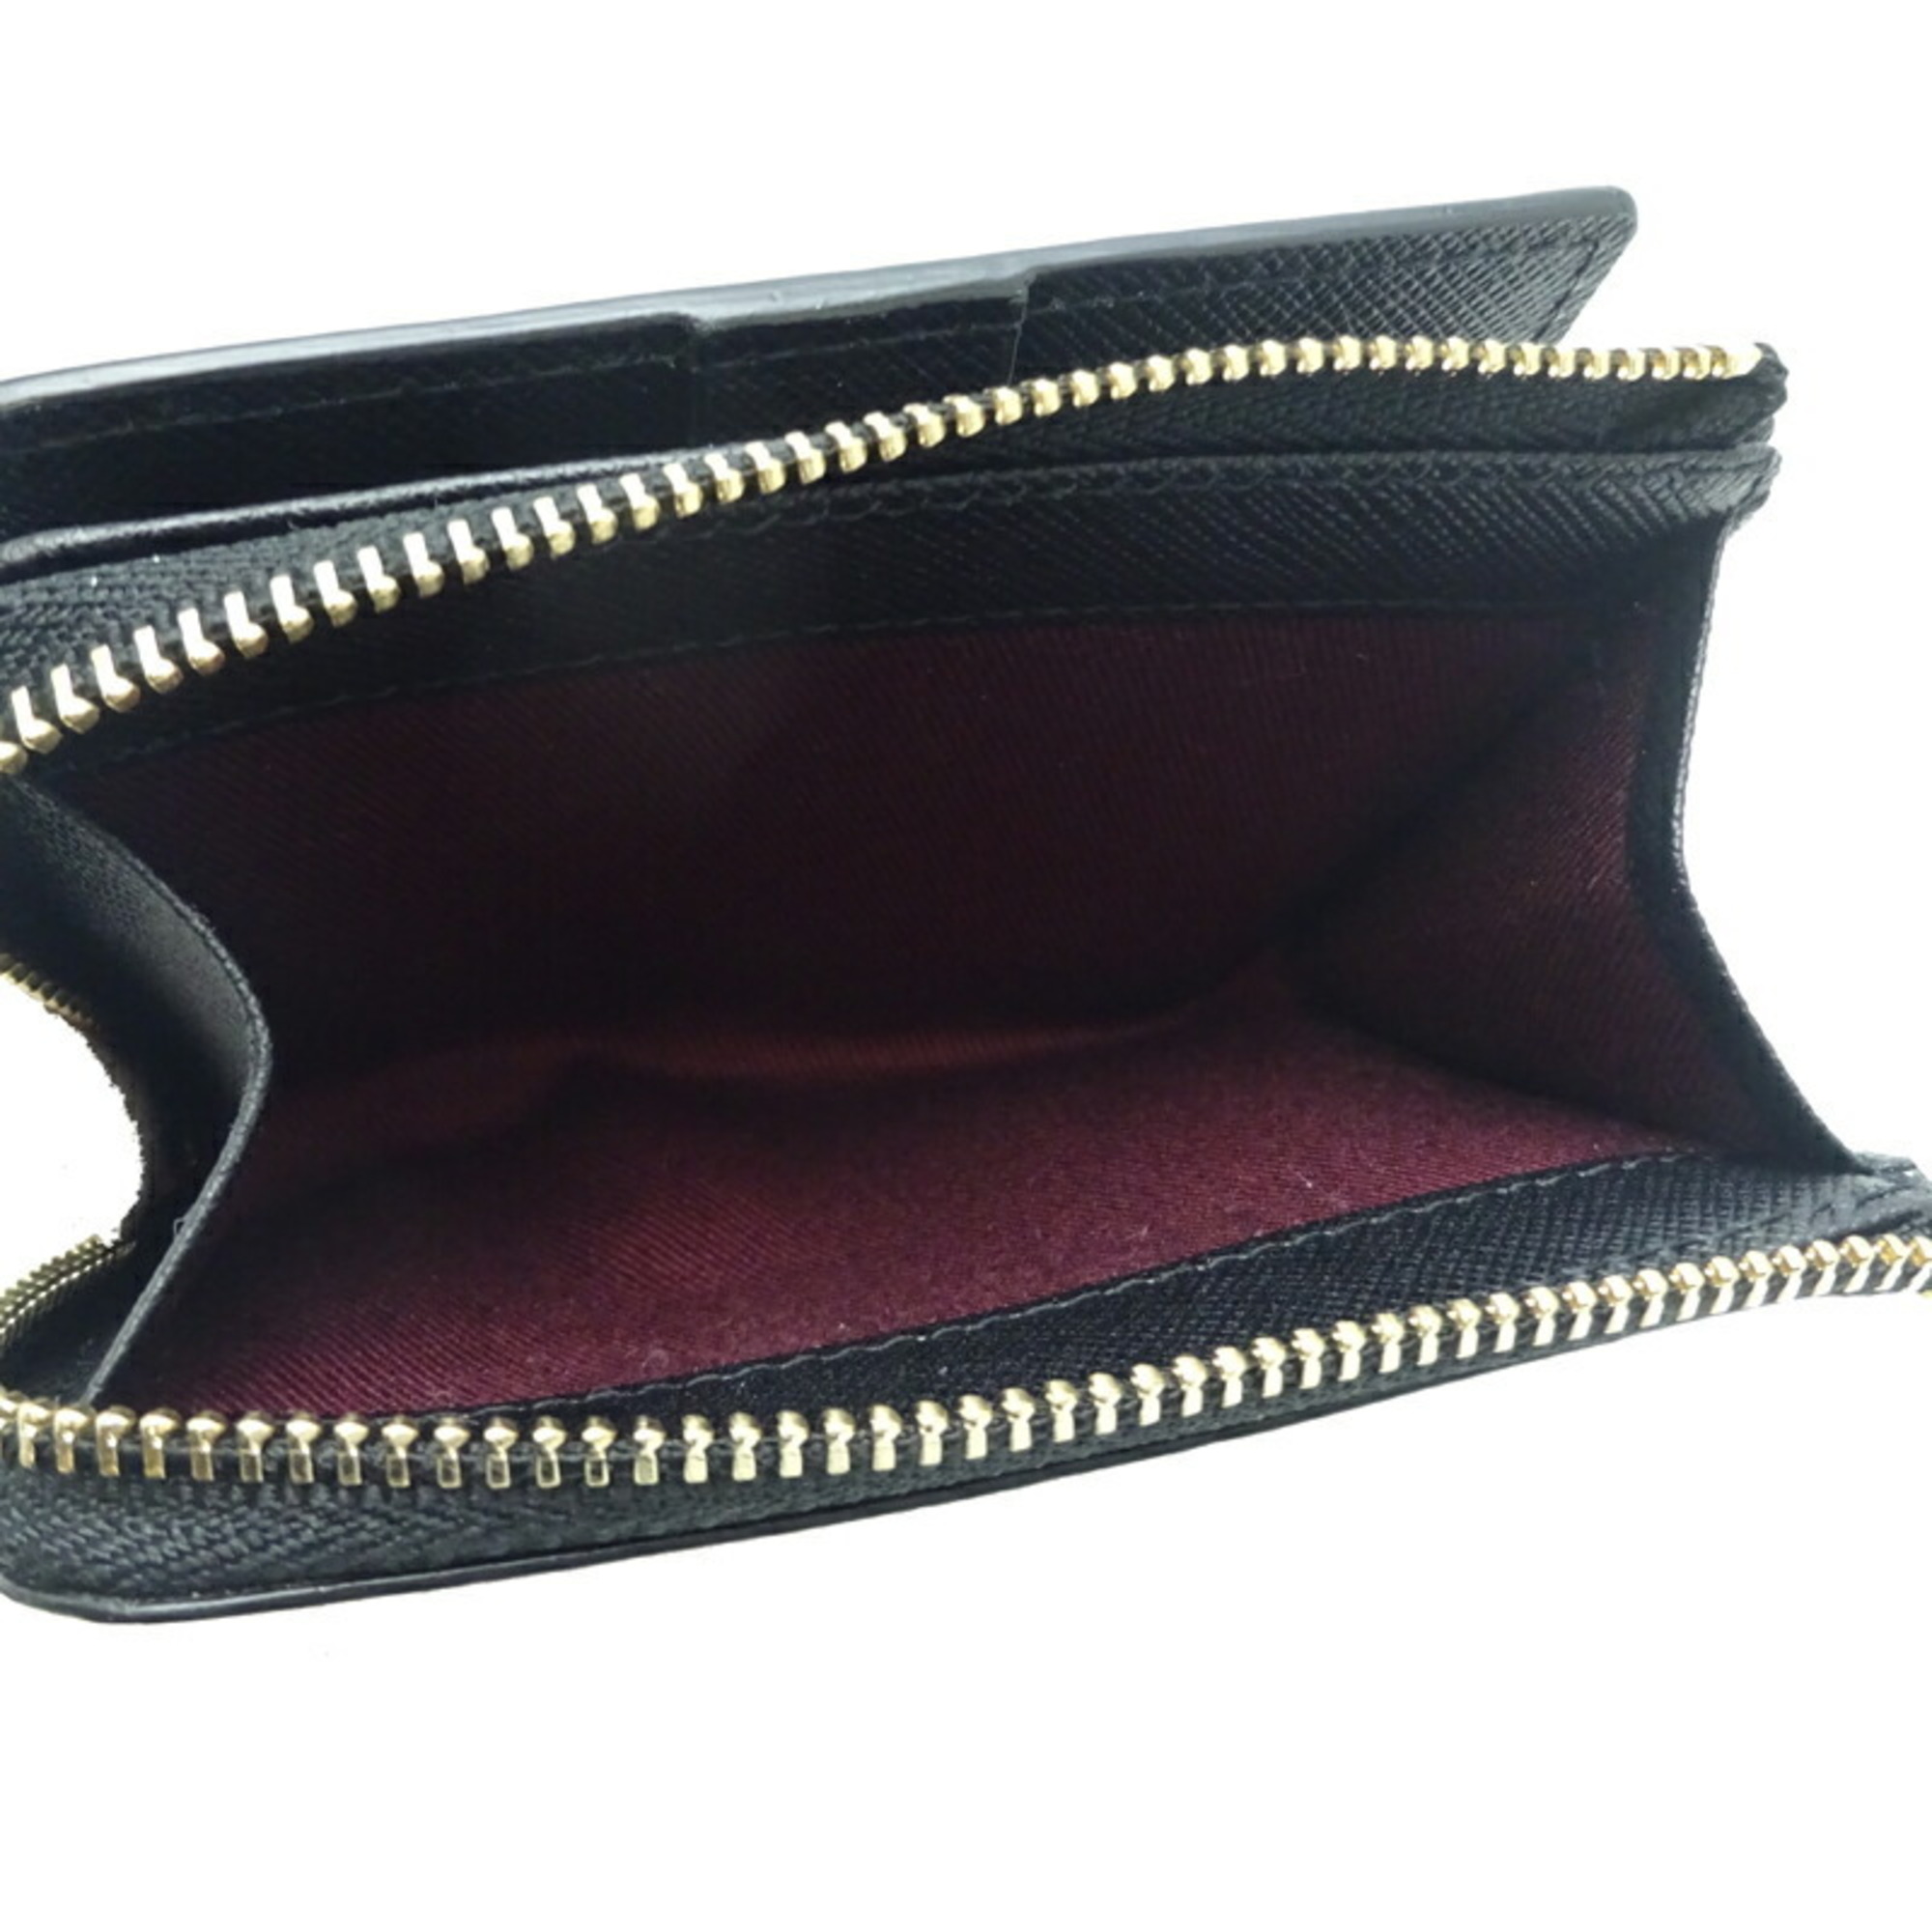 Paul Smith Zip Straw Grain Key Case for Women and Men, Coin Case, PSC781, Leather, Black